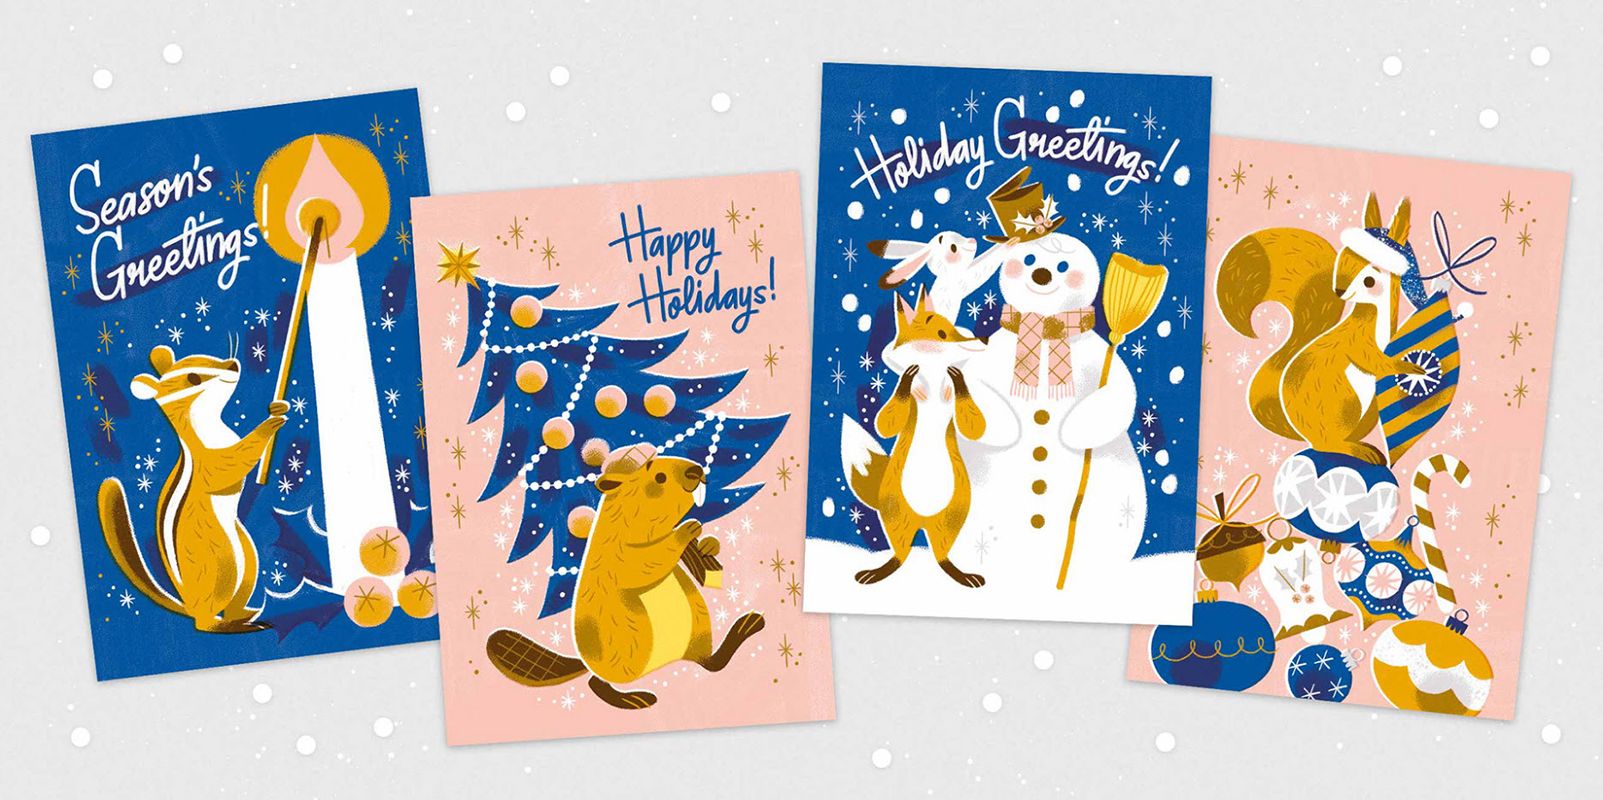 Four greeting cards with a holiday-inspired design on a gray background.